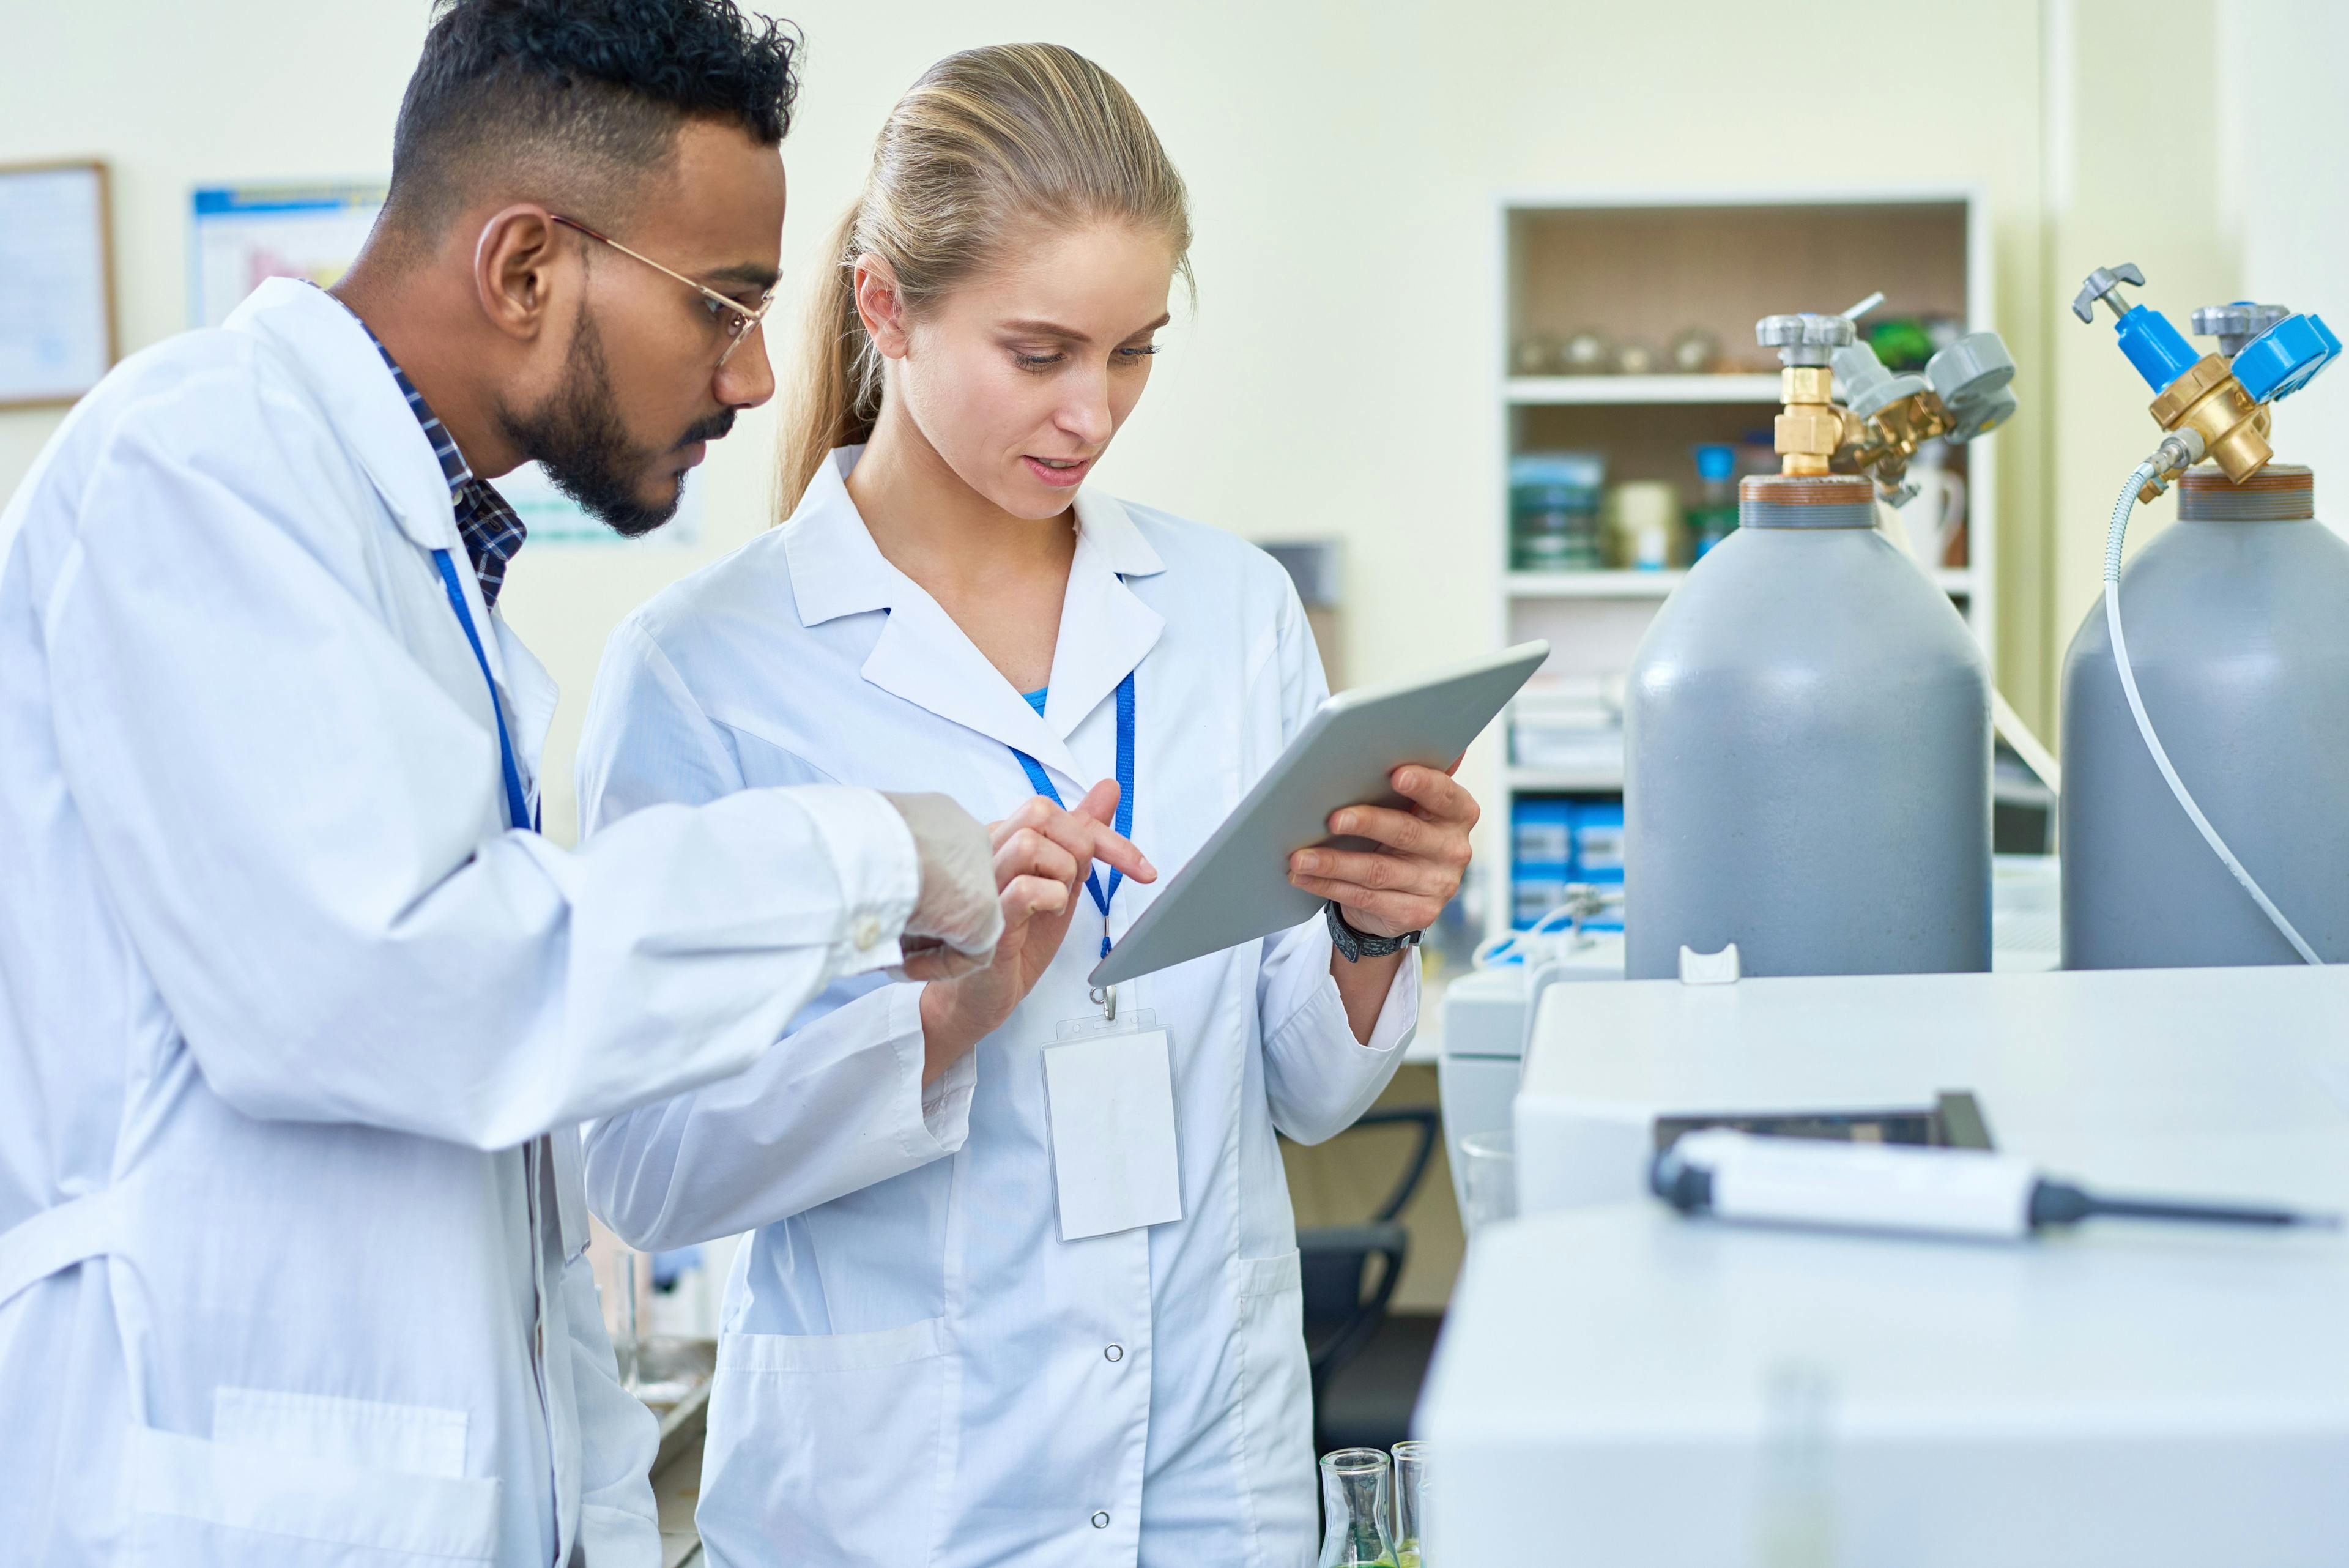 The Four Attributes of a Lead Pharmacy Technician